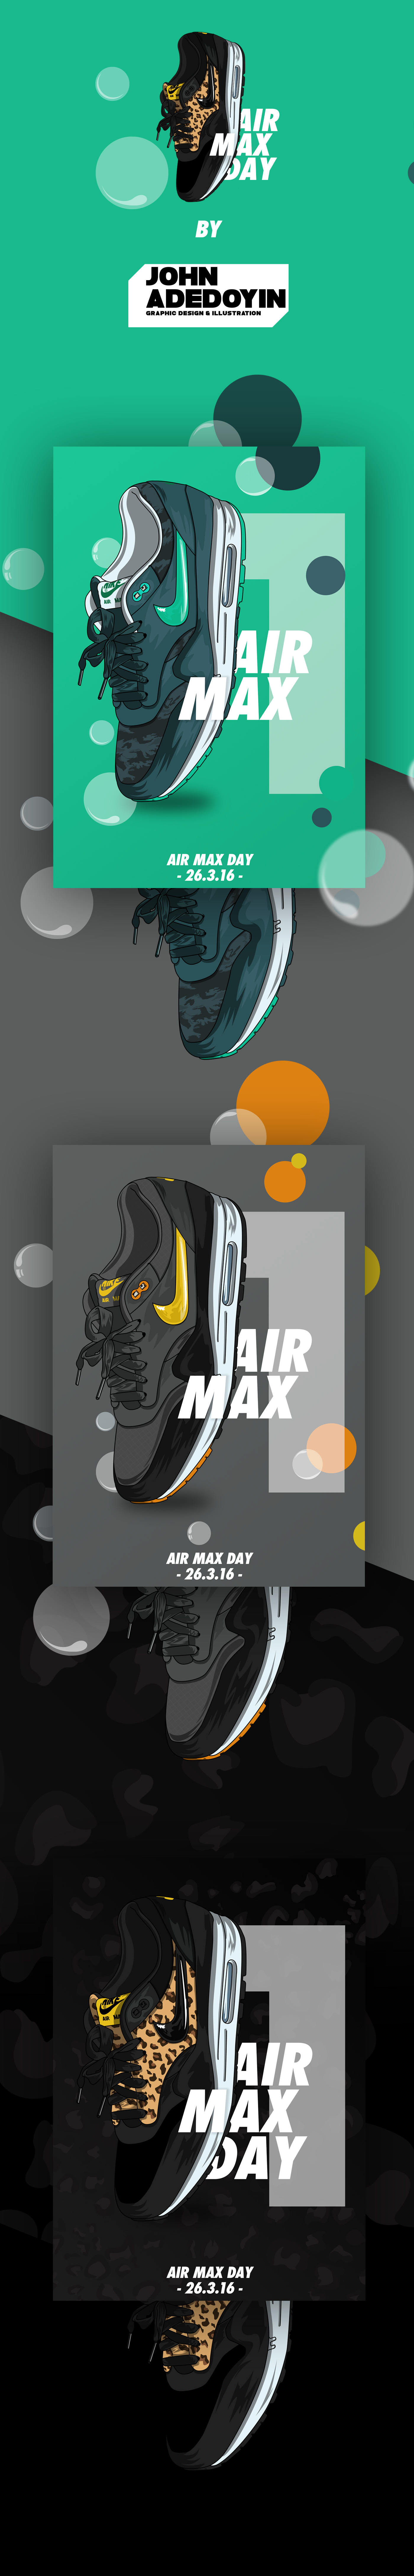 Nike nike air max AIR MAX DAY Passion Project sneakers trainers